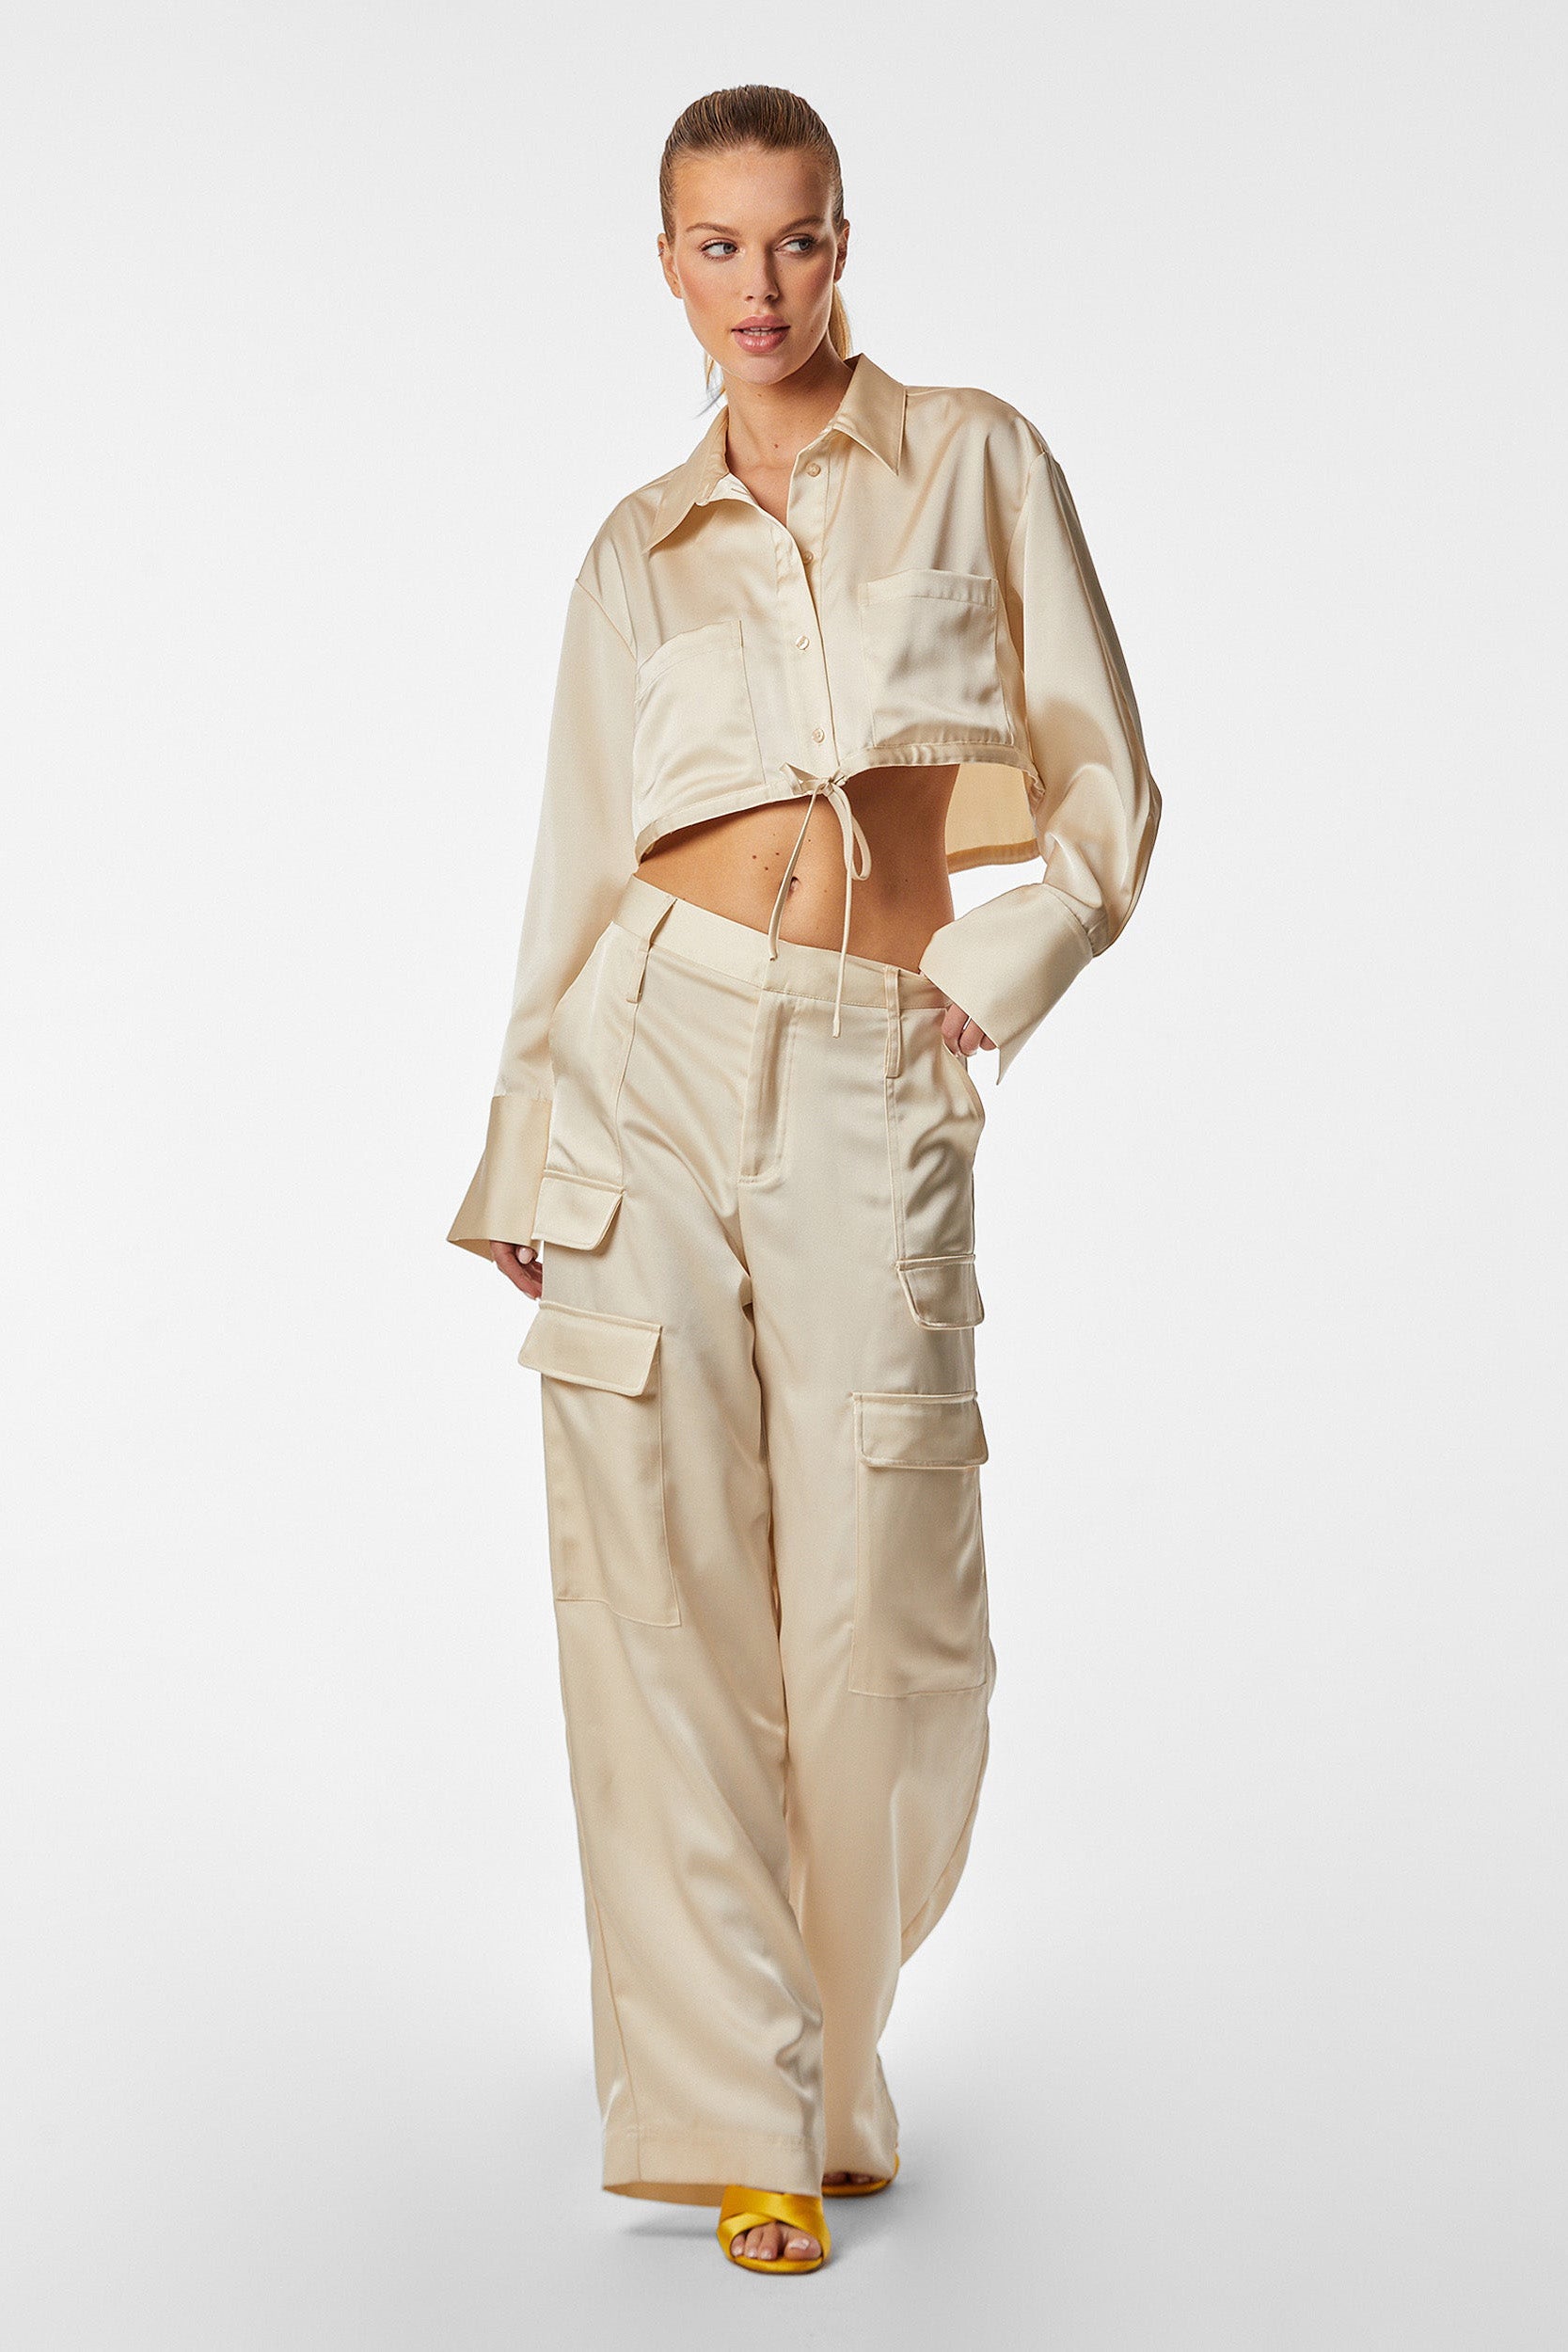 A person wearing the Milan Satin Cargo Pant in Pearl paired with an off-white, long-sleeve, cropped button-up shirt made from satin-like fabric. They have one hand in their pocket and are walking towards the camera, also sporting yellow open-toe heels.